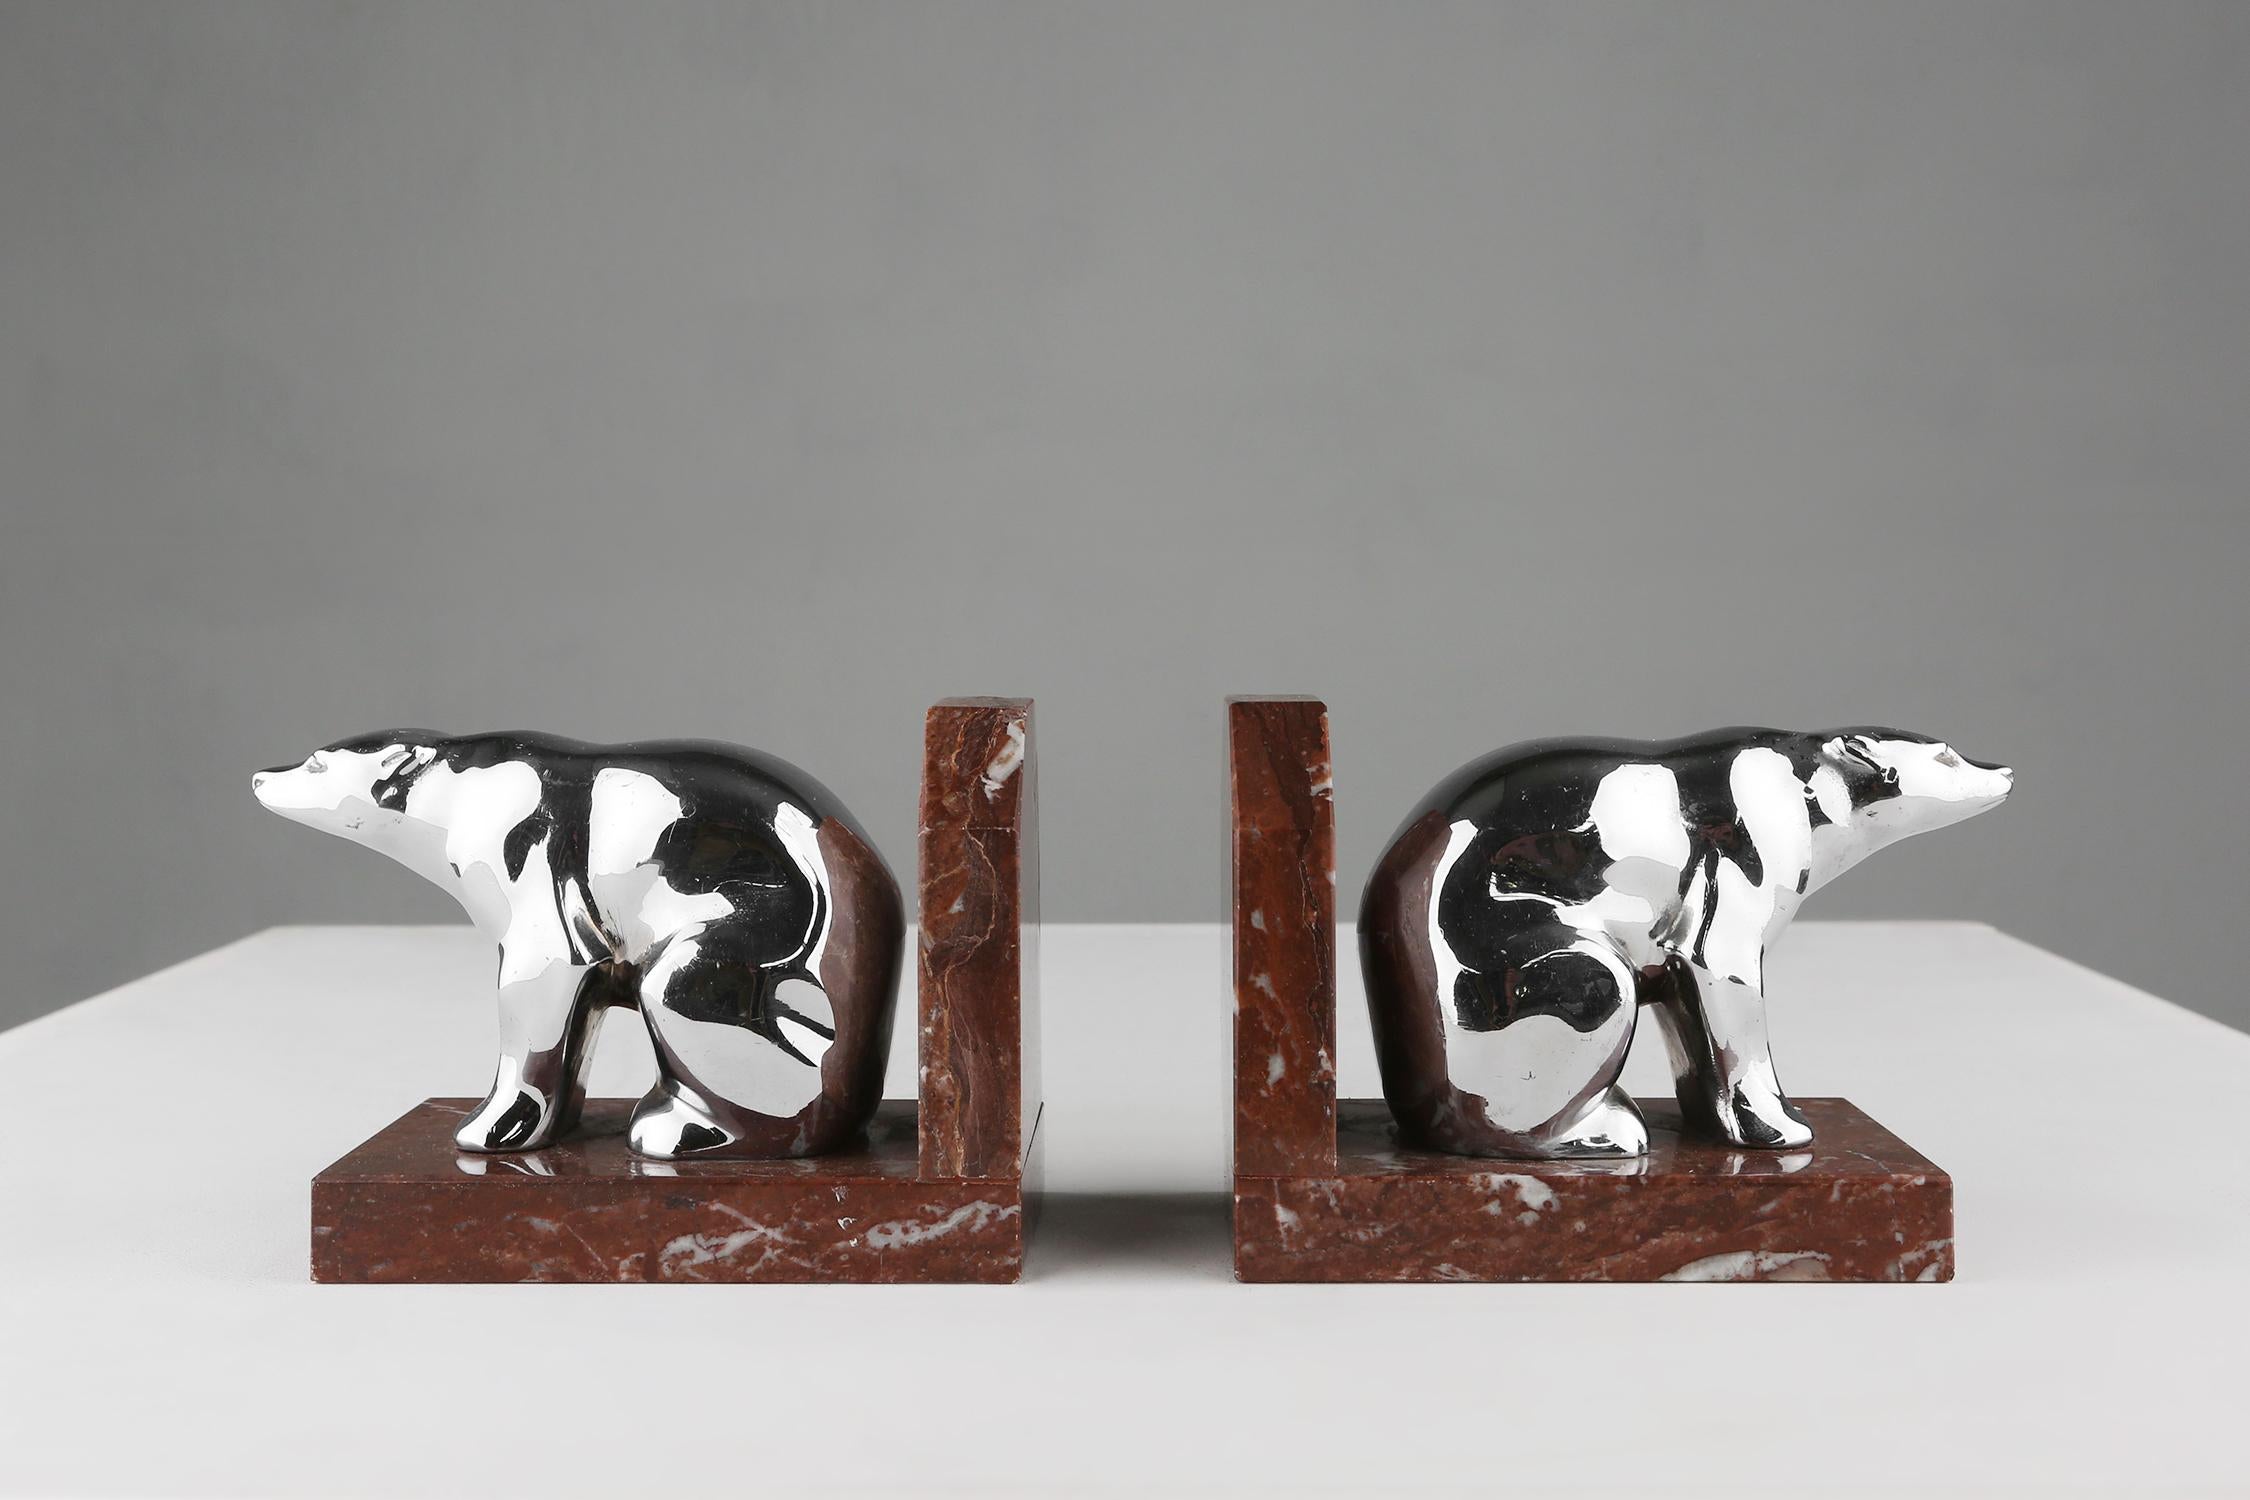 Brighten up your bookcase with these stunning marble and metal bear bookends. Made of high-quality marble and chrome metal, these bookends have a charming design that will brighten up any room. The marble base is sturdy and solid, and has a natural